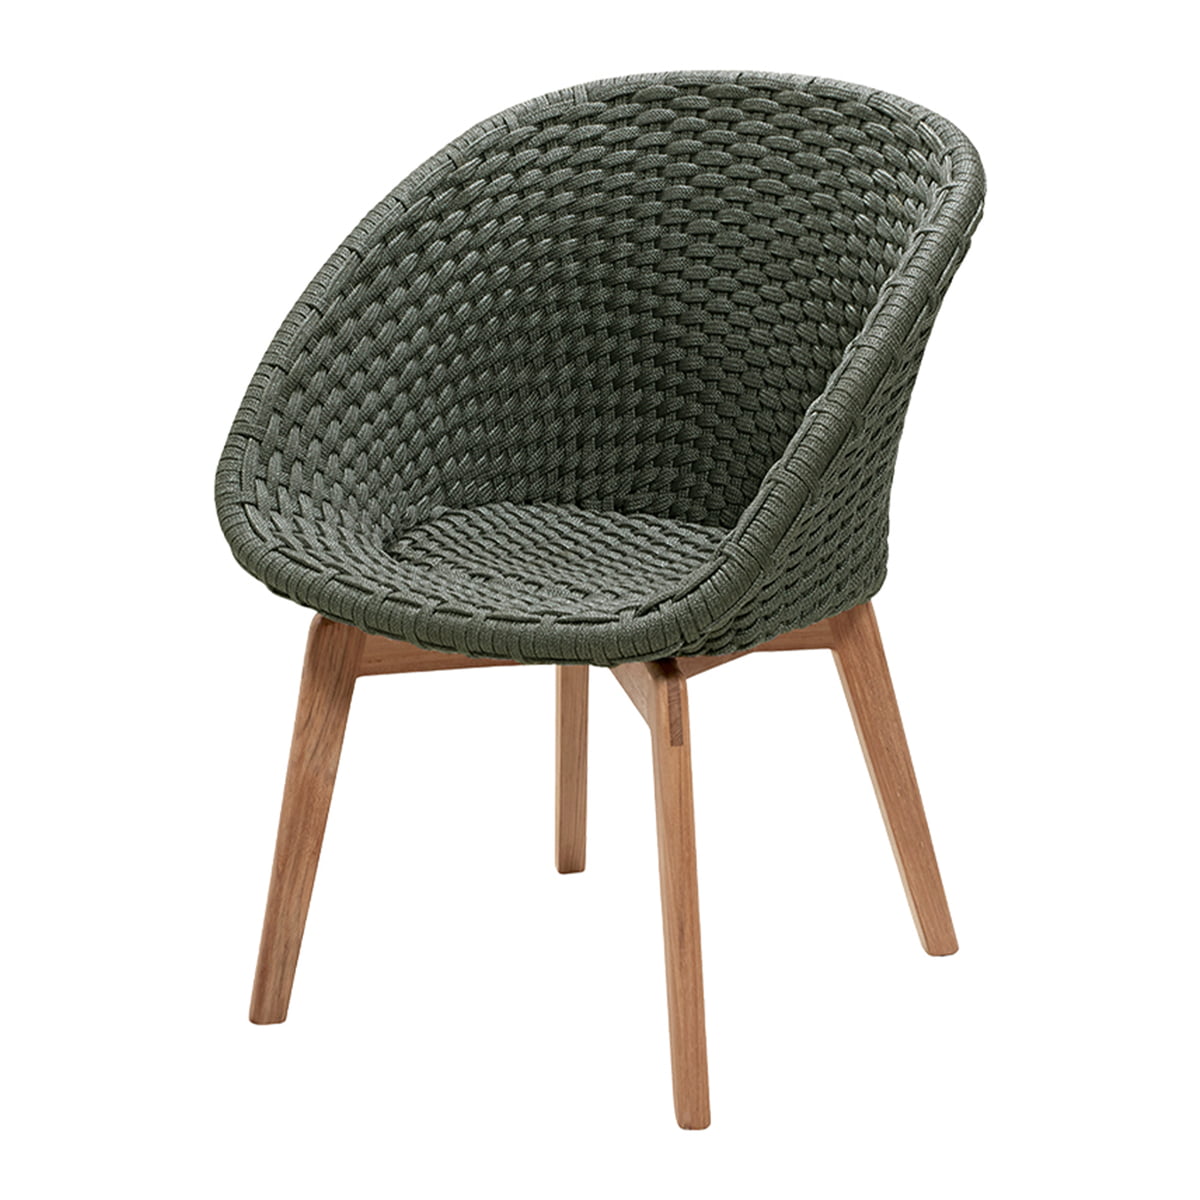 Cane-line - Peacock Sessel Outdoor